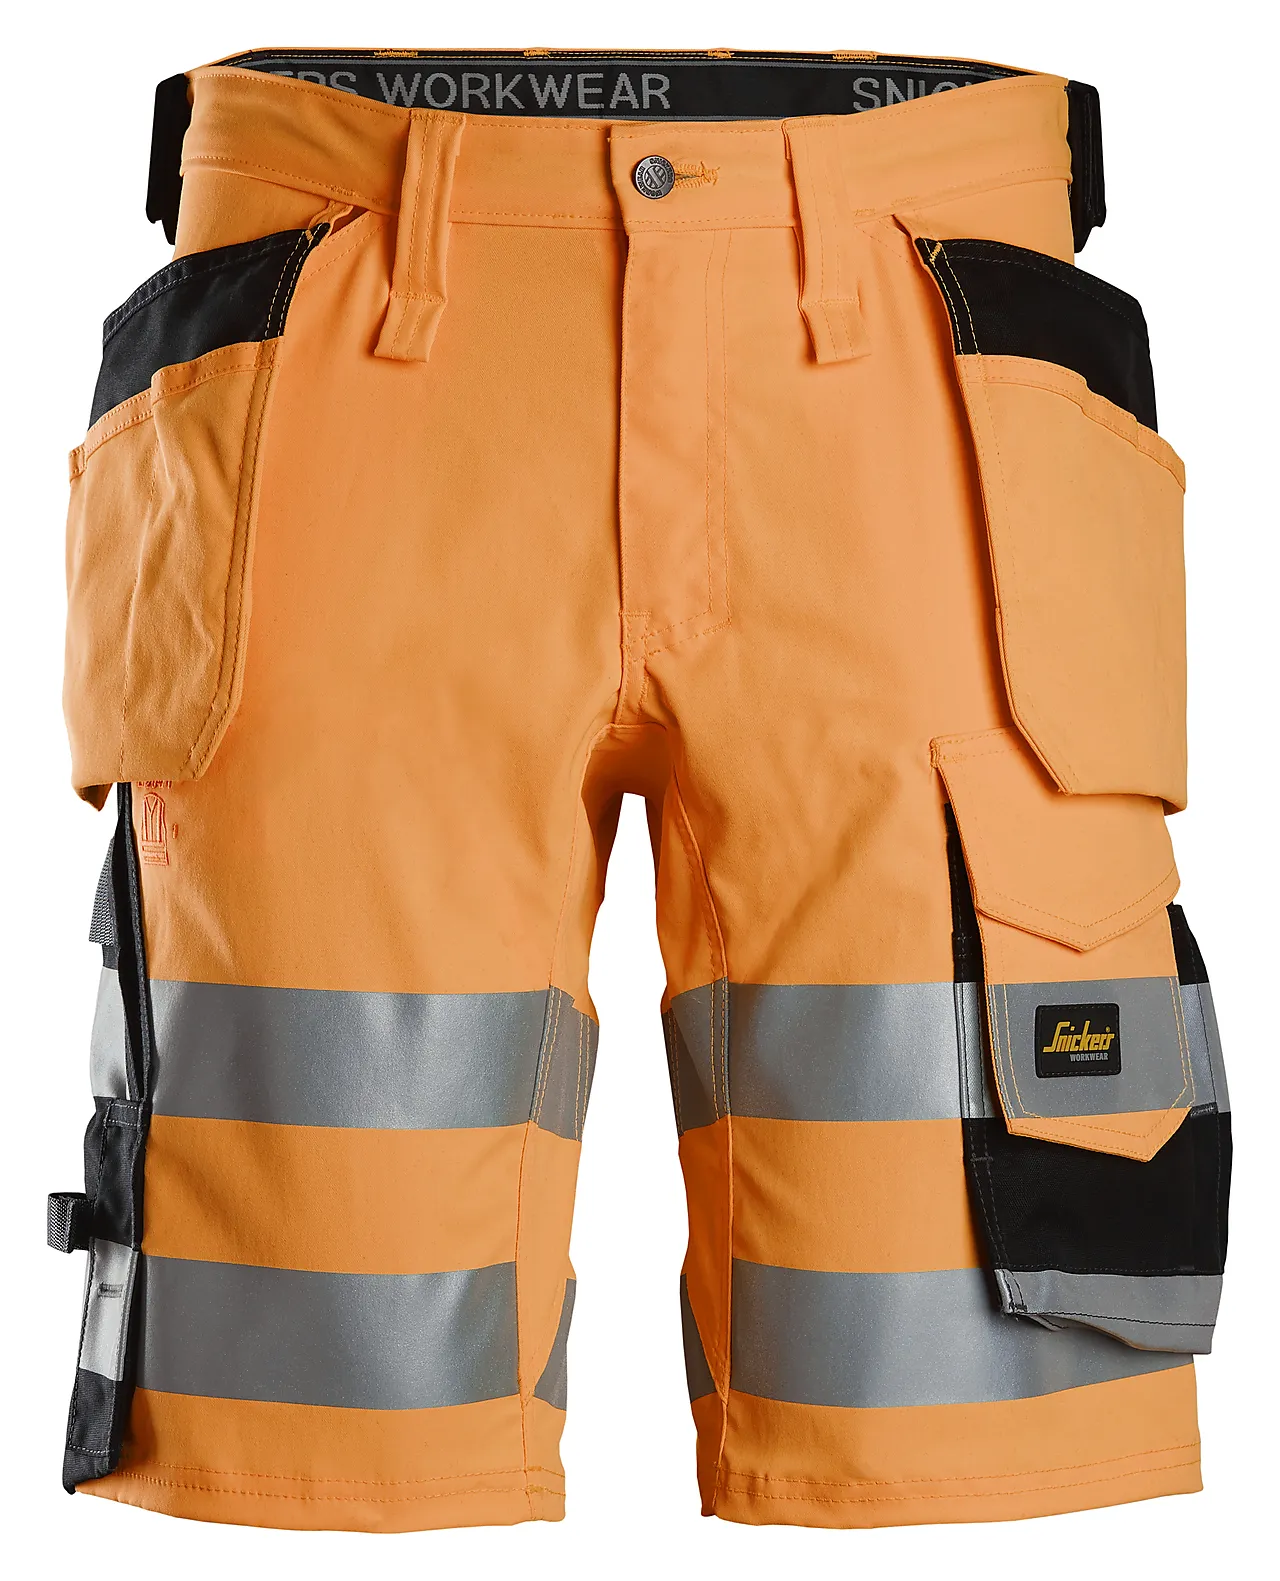 Shorts 6135 ora hl kl1 54 snickers workwear